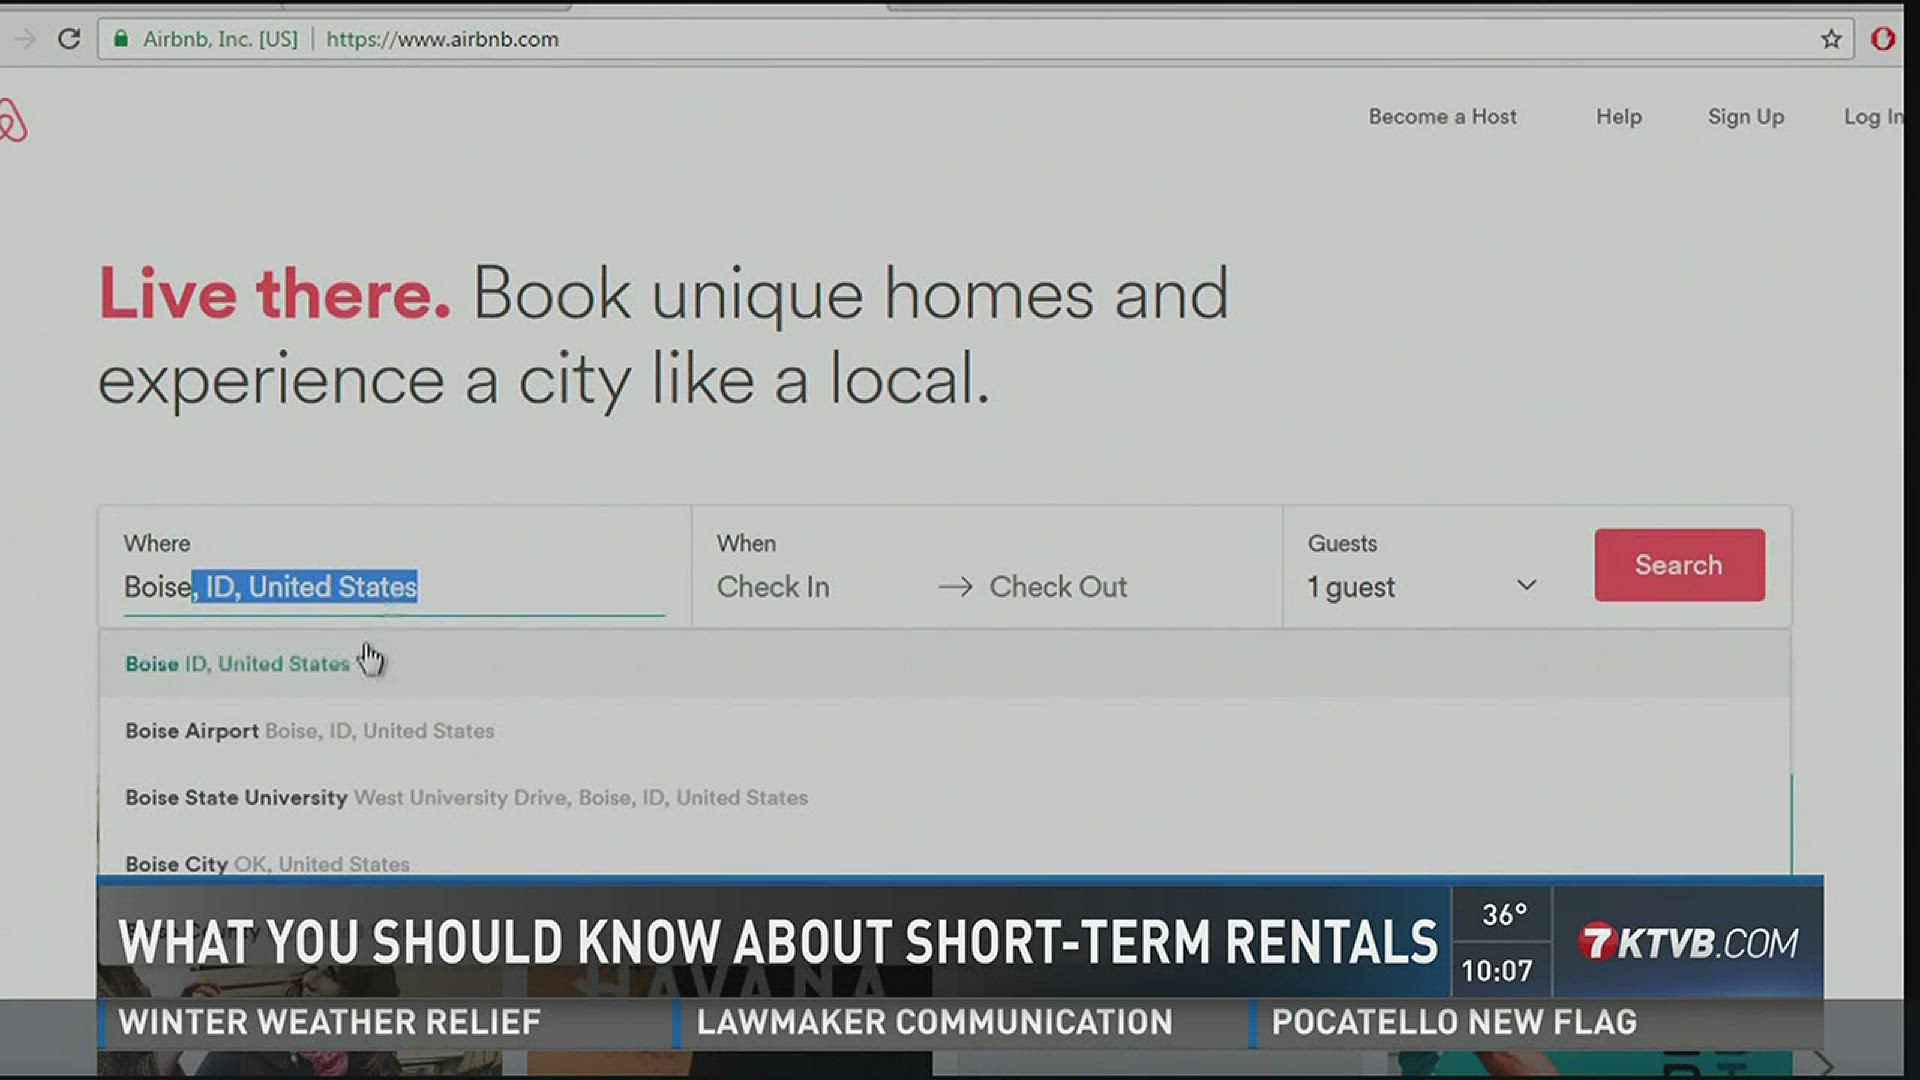 What you should know about short-term rentals.